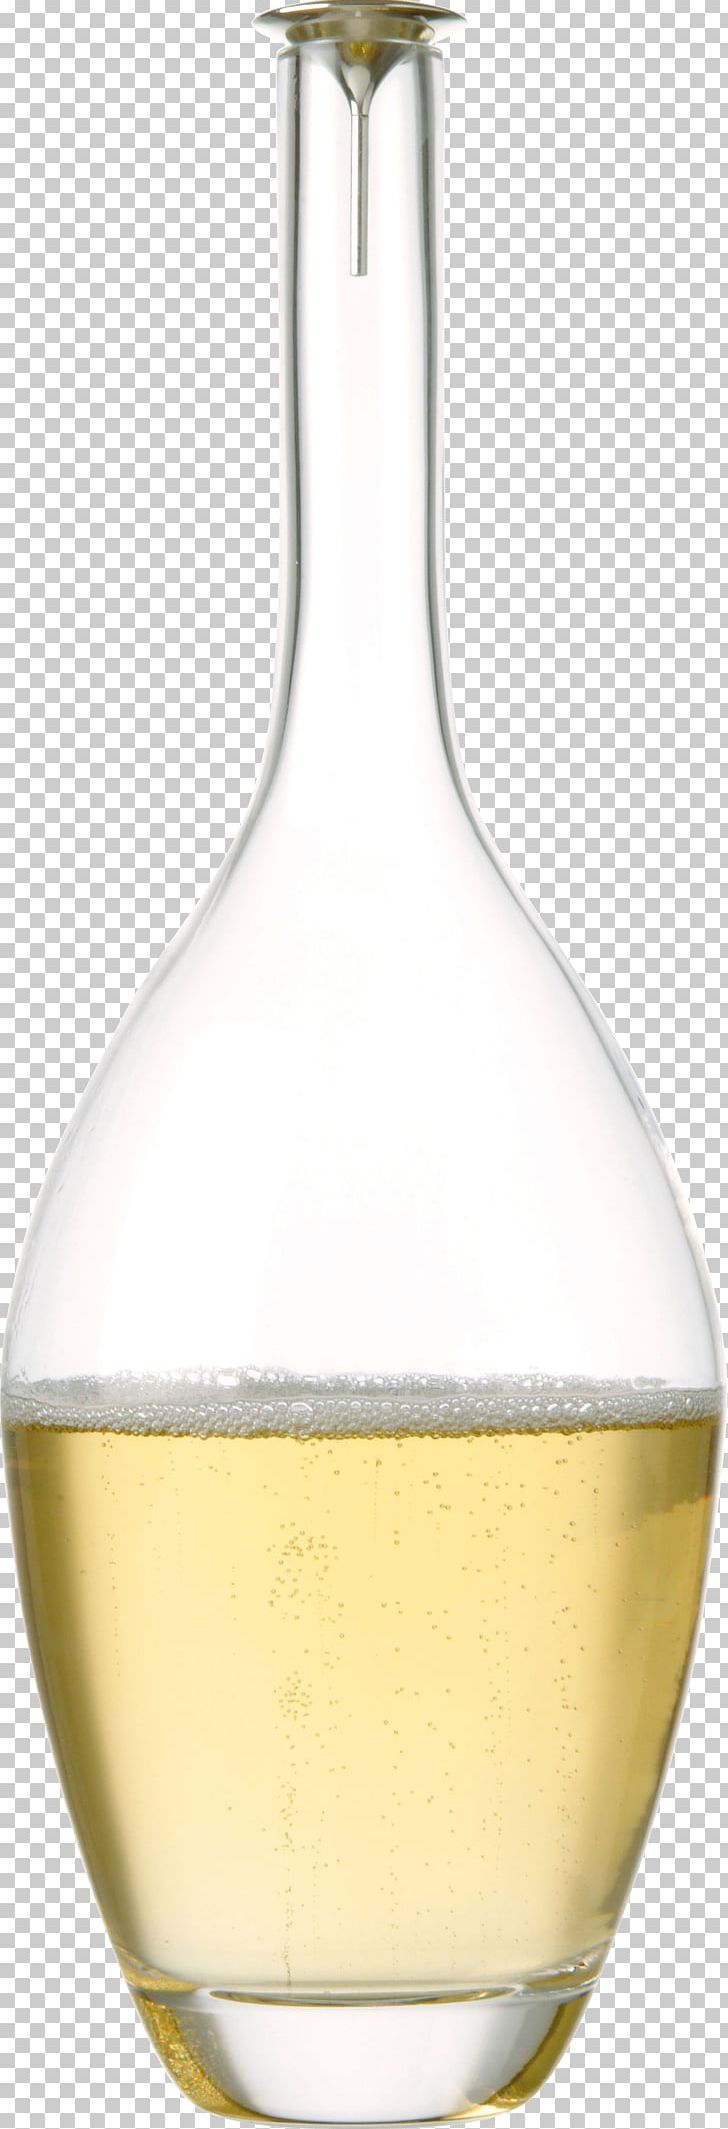 Wine Carafe Decanter Champagne Bung PNG, Clipart, Barware, Bottle, Bung, Carafe, Champagne Free PNG Download